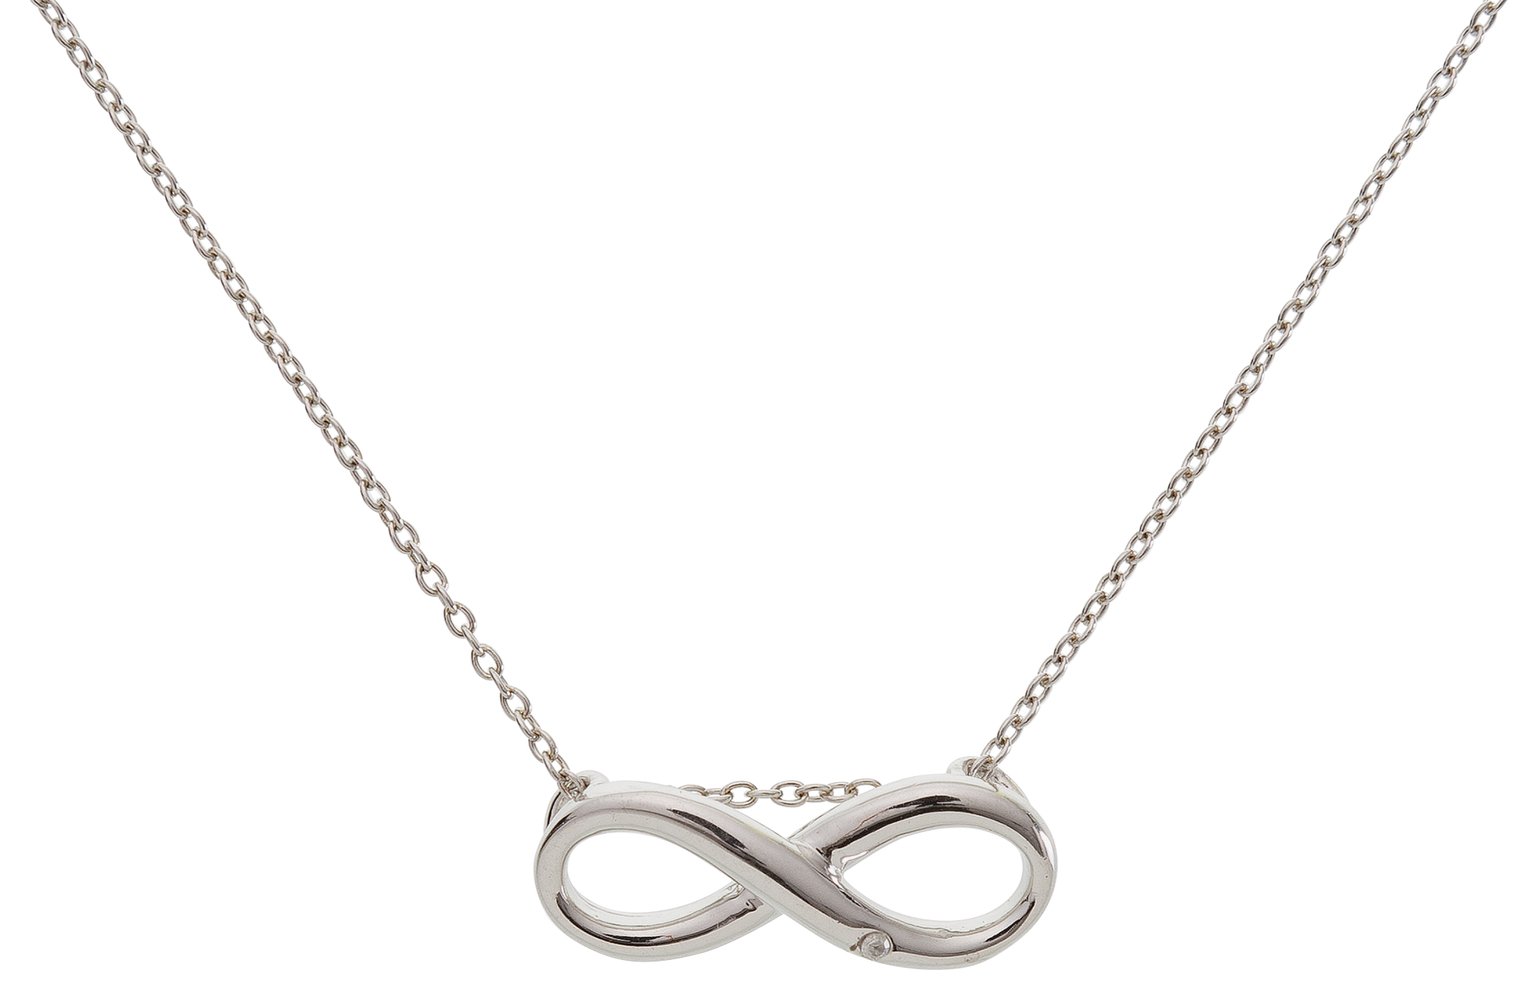 Accents by Hot Diamonds Infinity Pendant Necklace